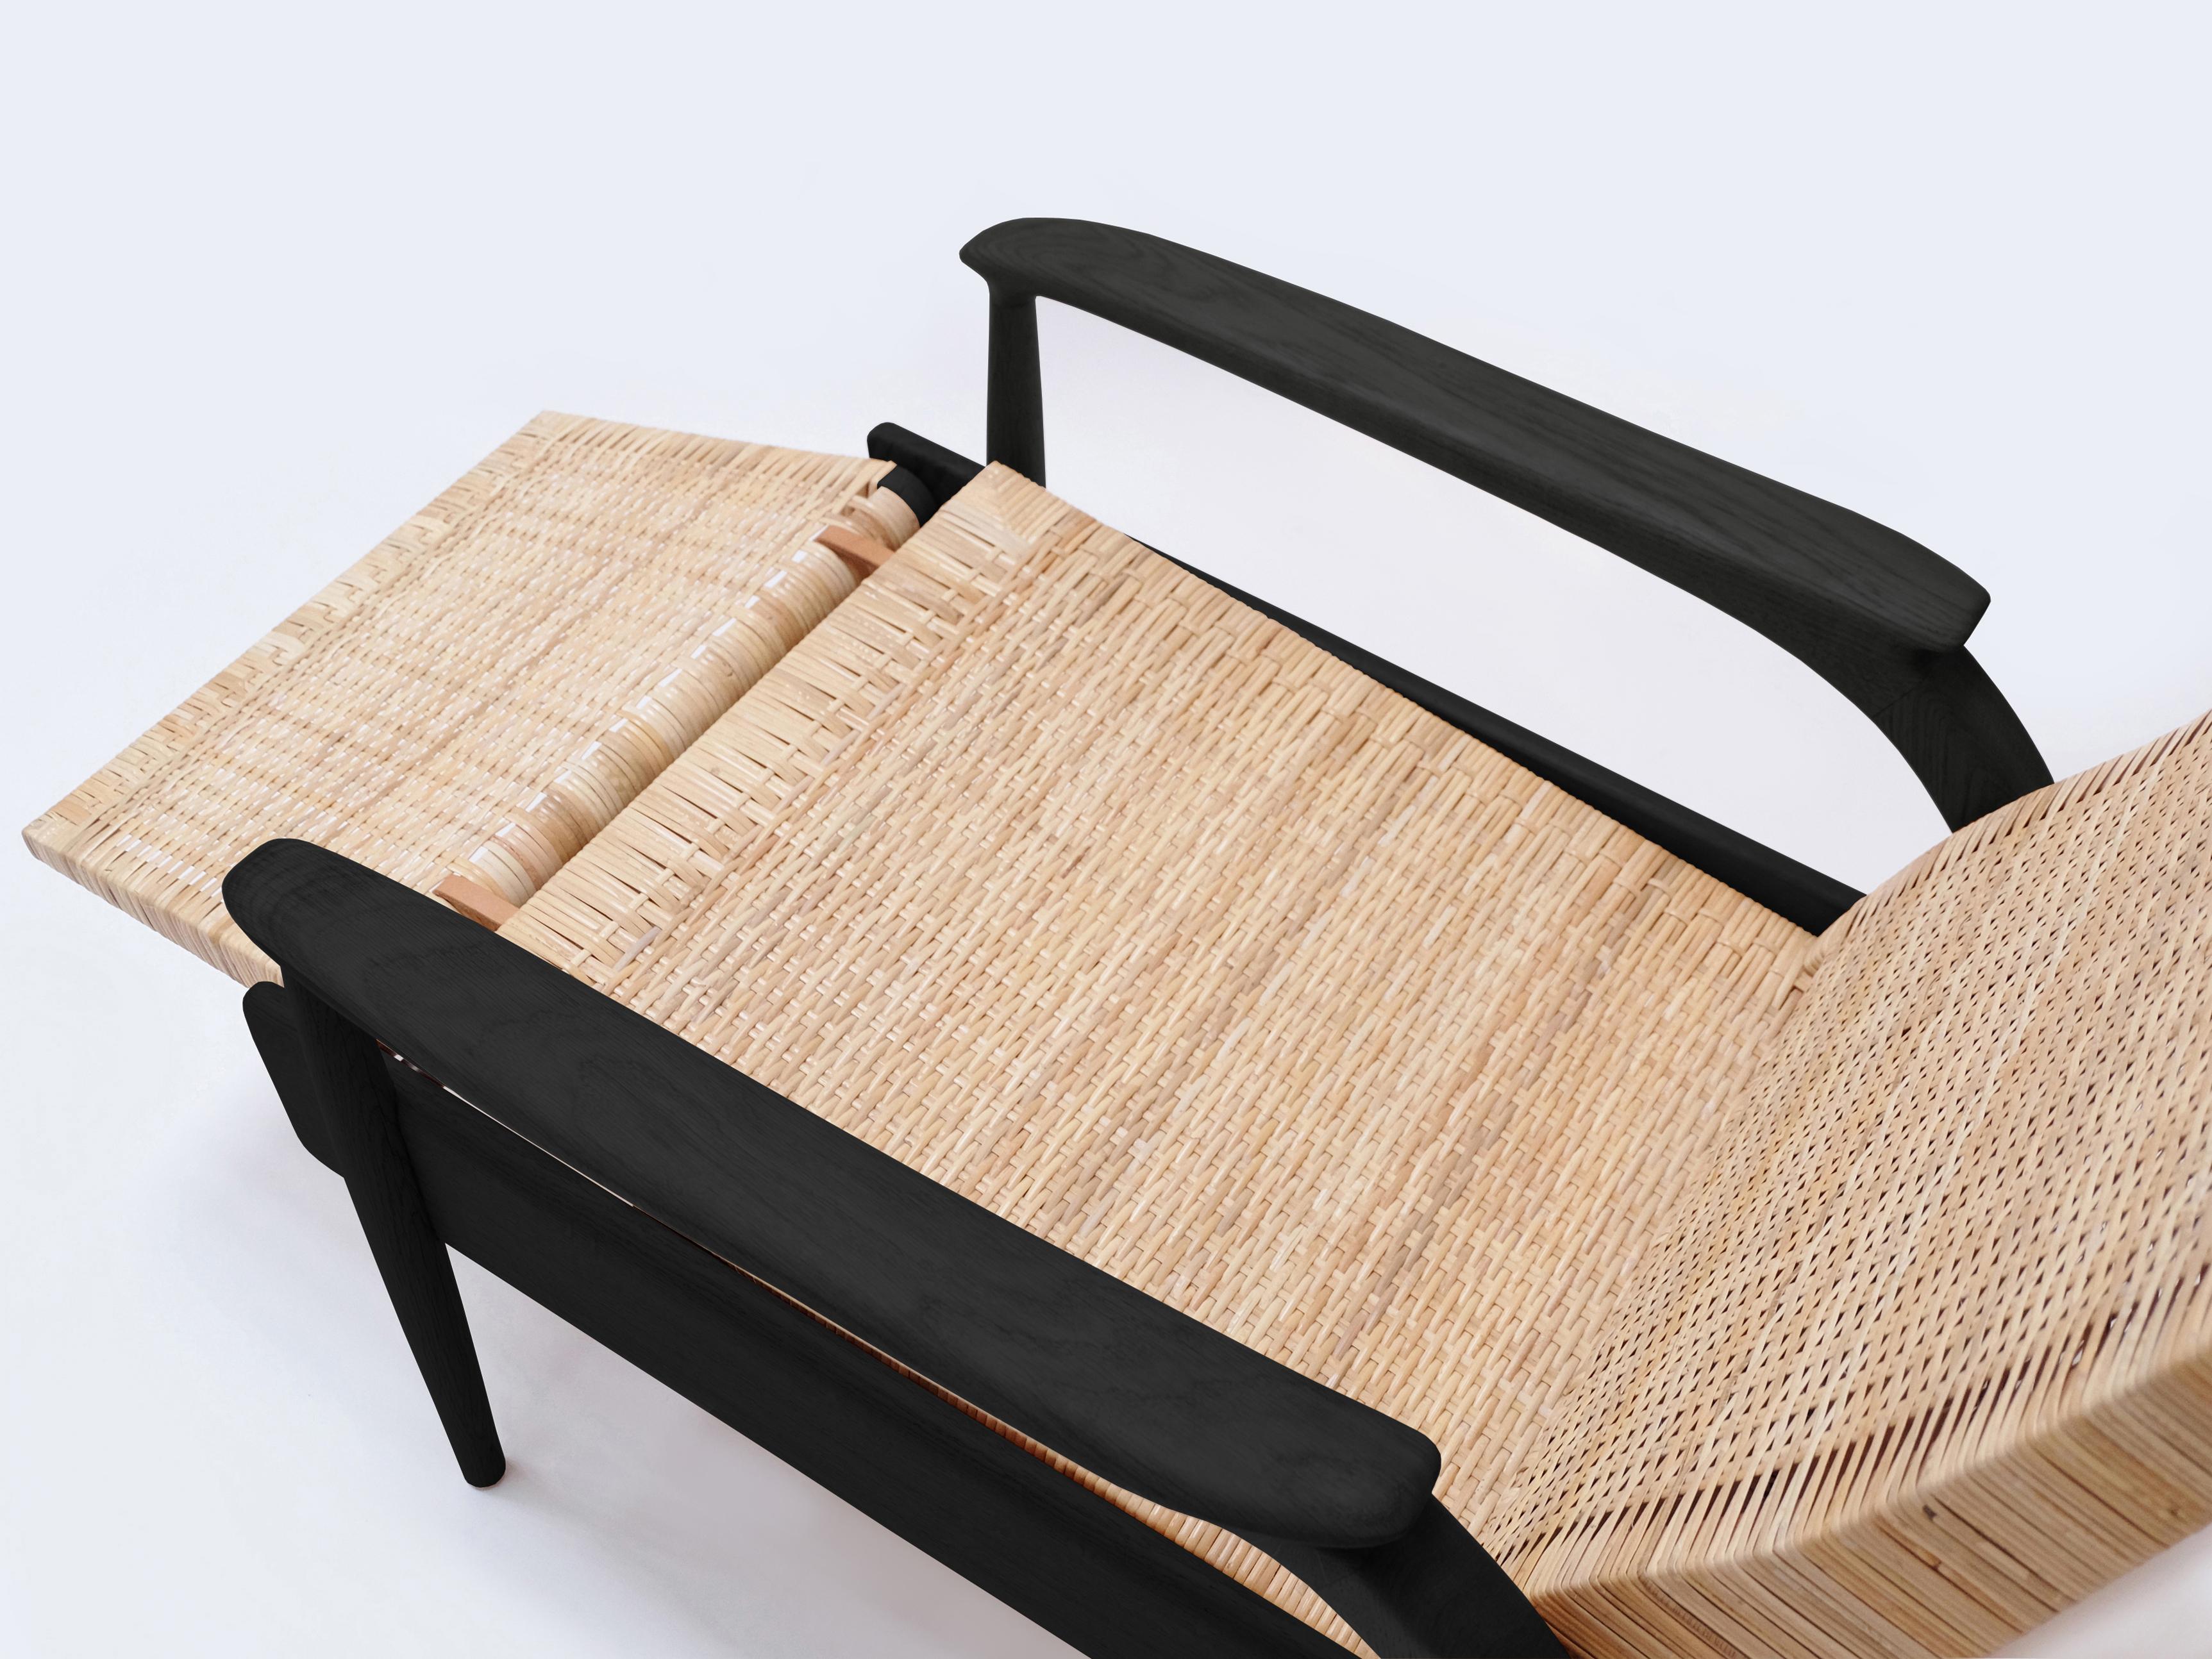 Hand-Woven Pair of Eco-Armchairs, Blackened Oak, Handwoven Natural Cane, Leather Cushions For Sale